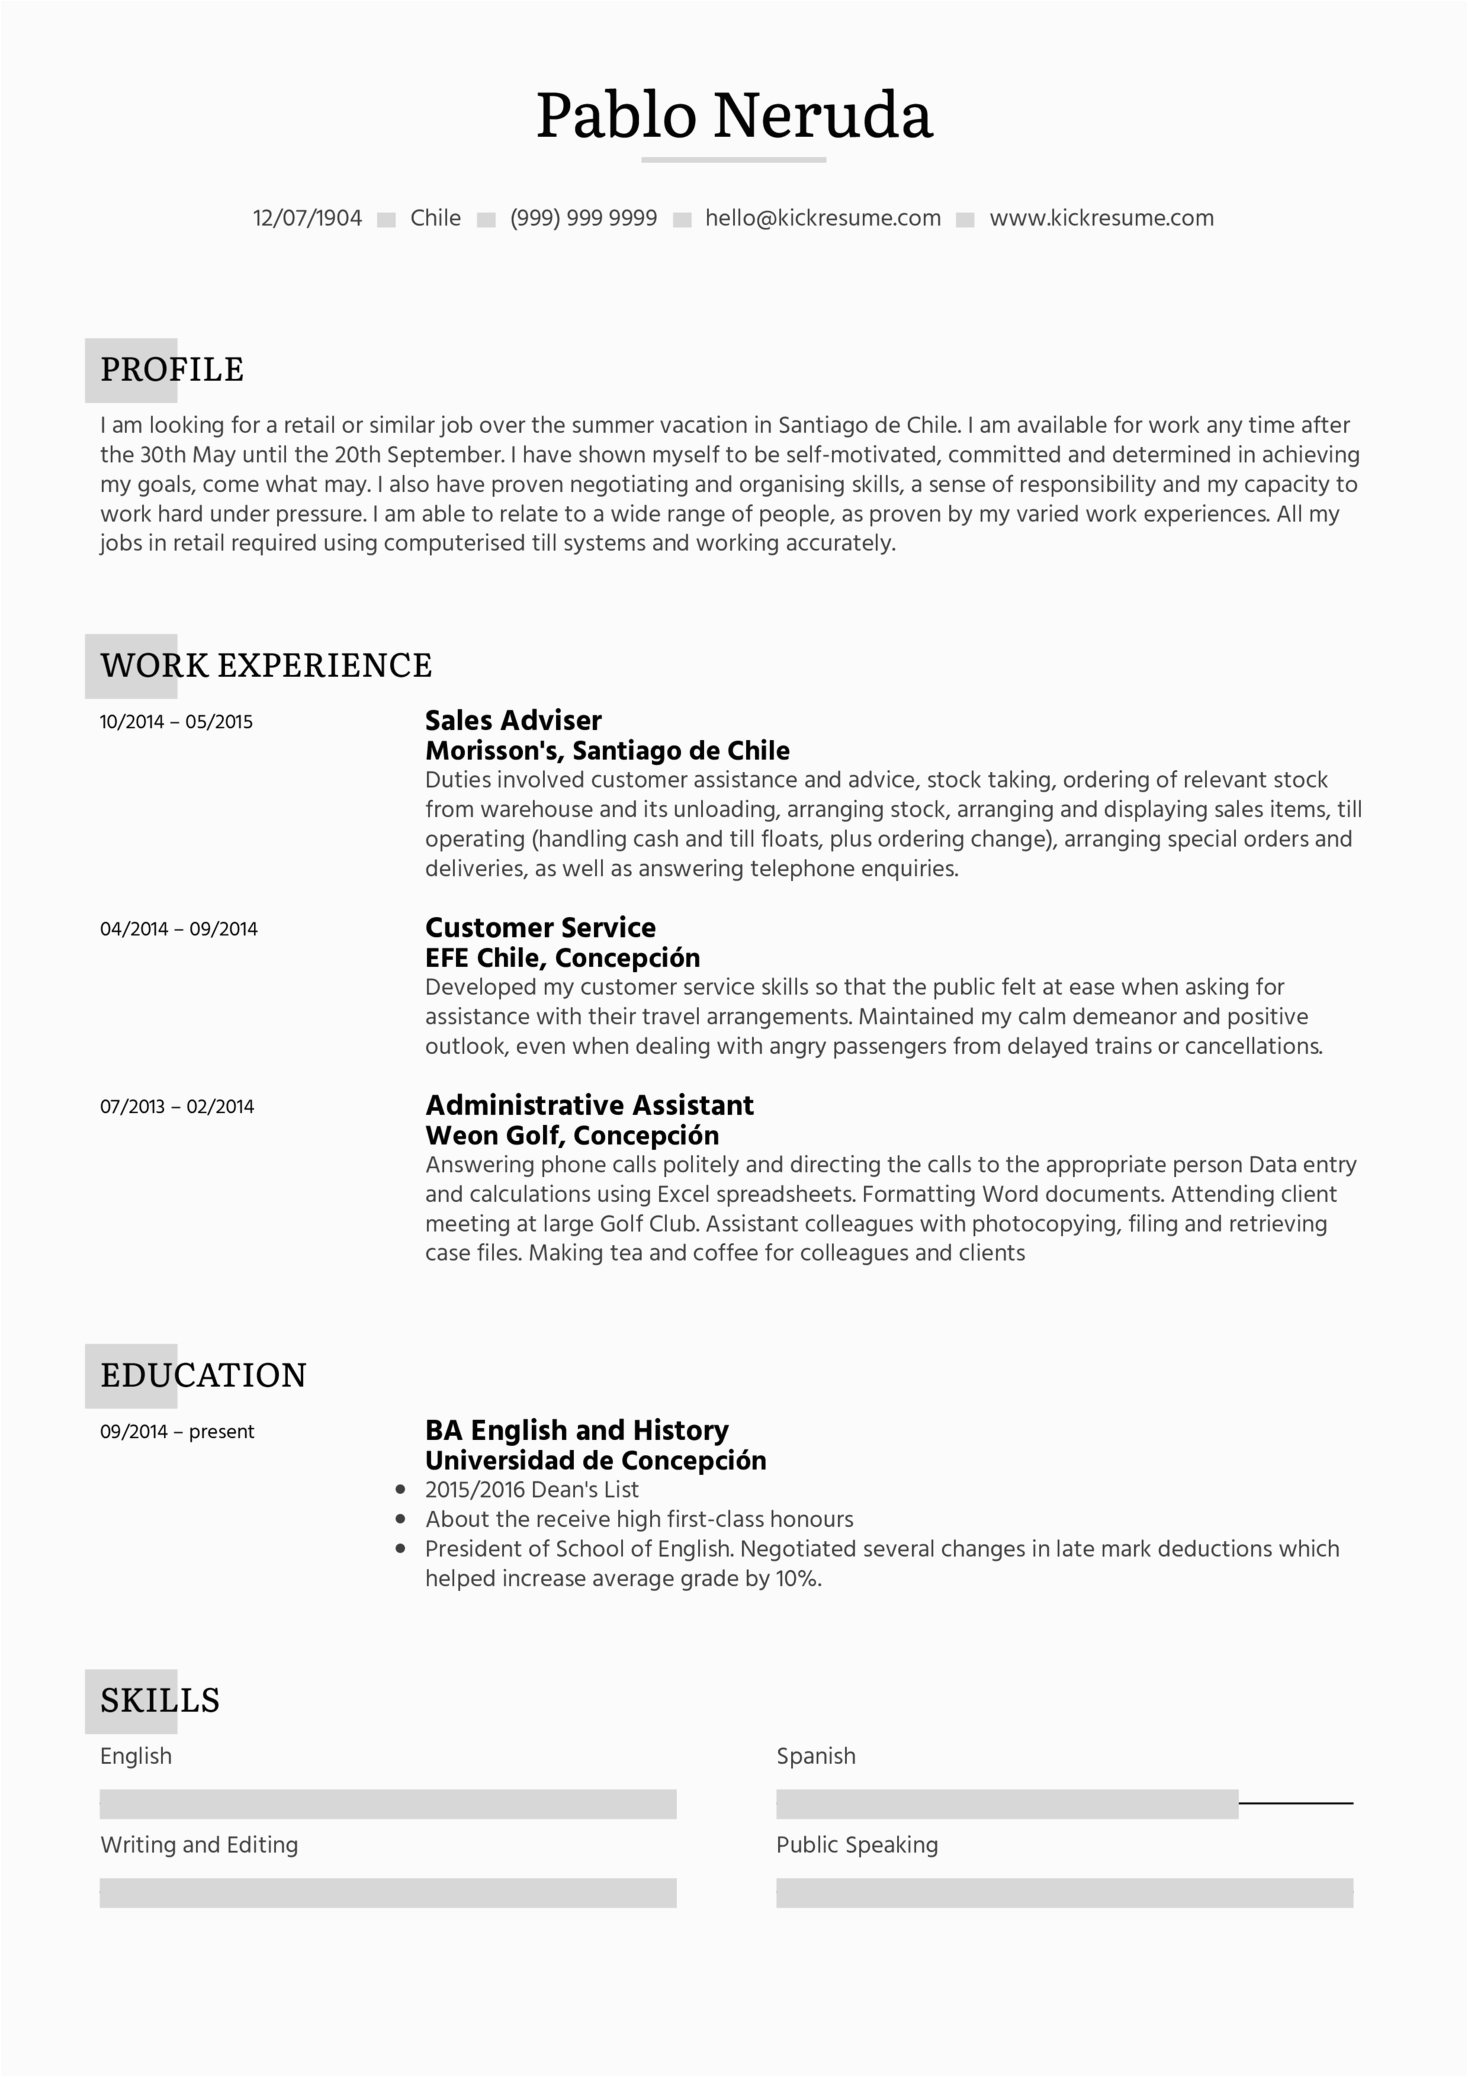 Sample Resume for College Student Looking for Summer Job Student Resume Summer Job